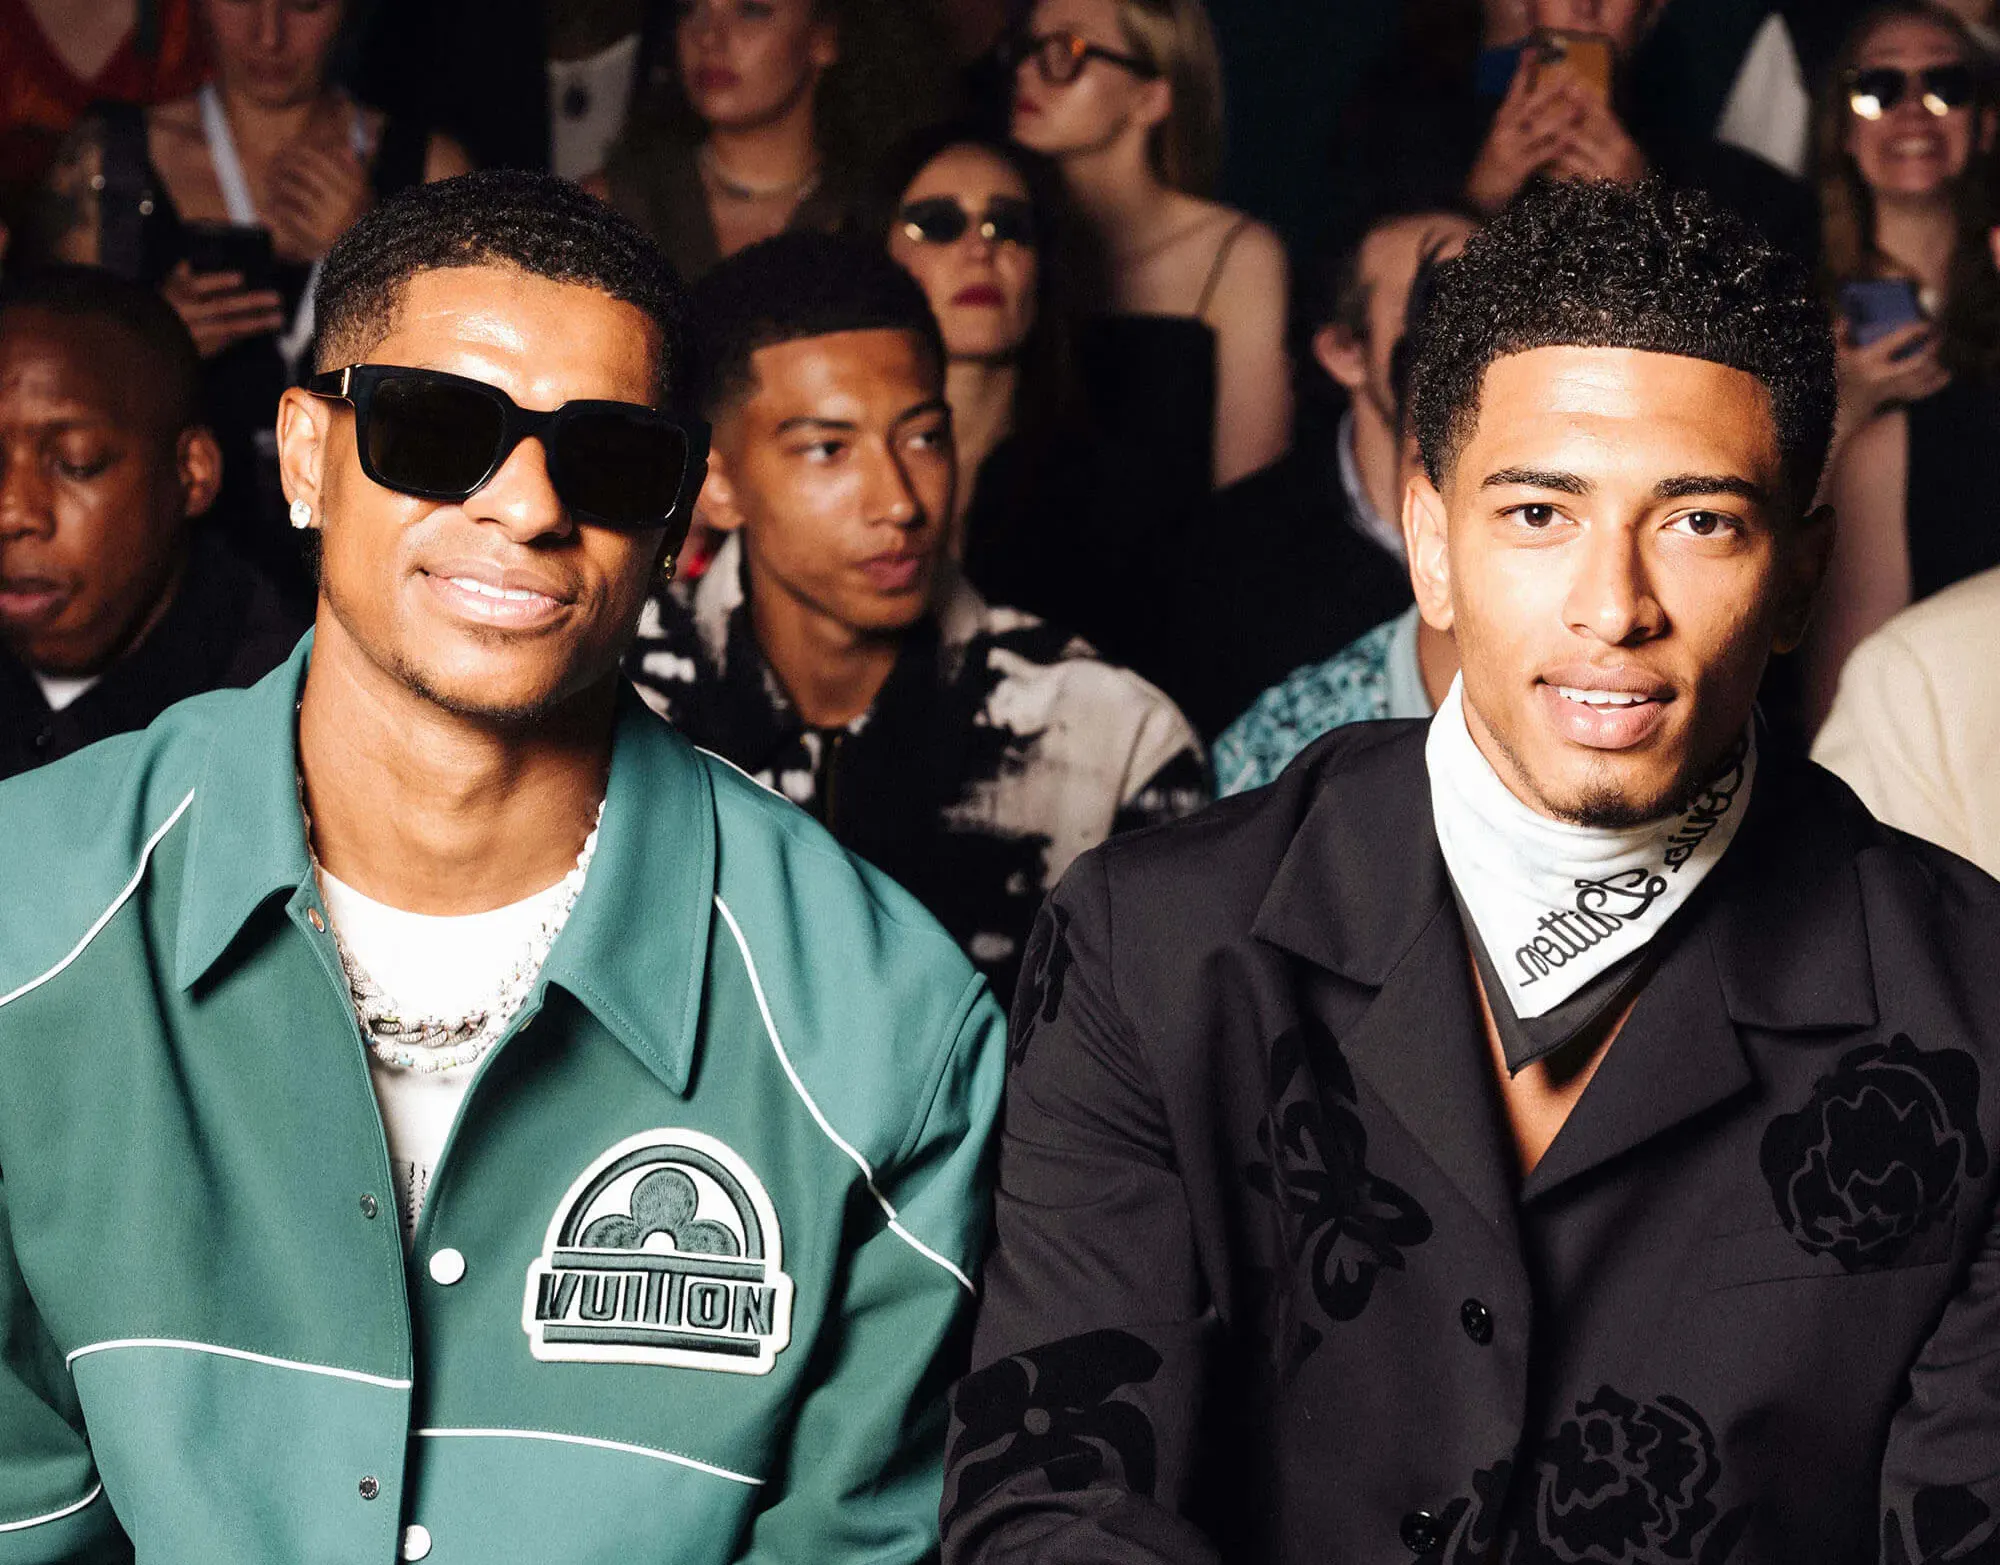 Sports Stars Are Flocking to Fashion Shows. How Big Is the Opportunity for Brands?